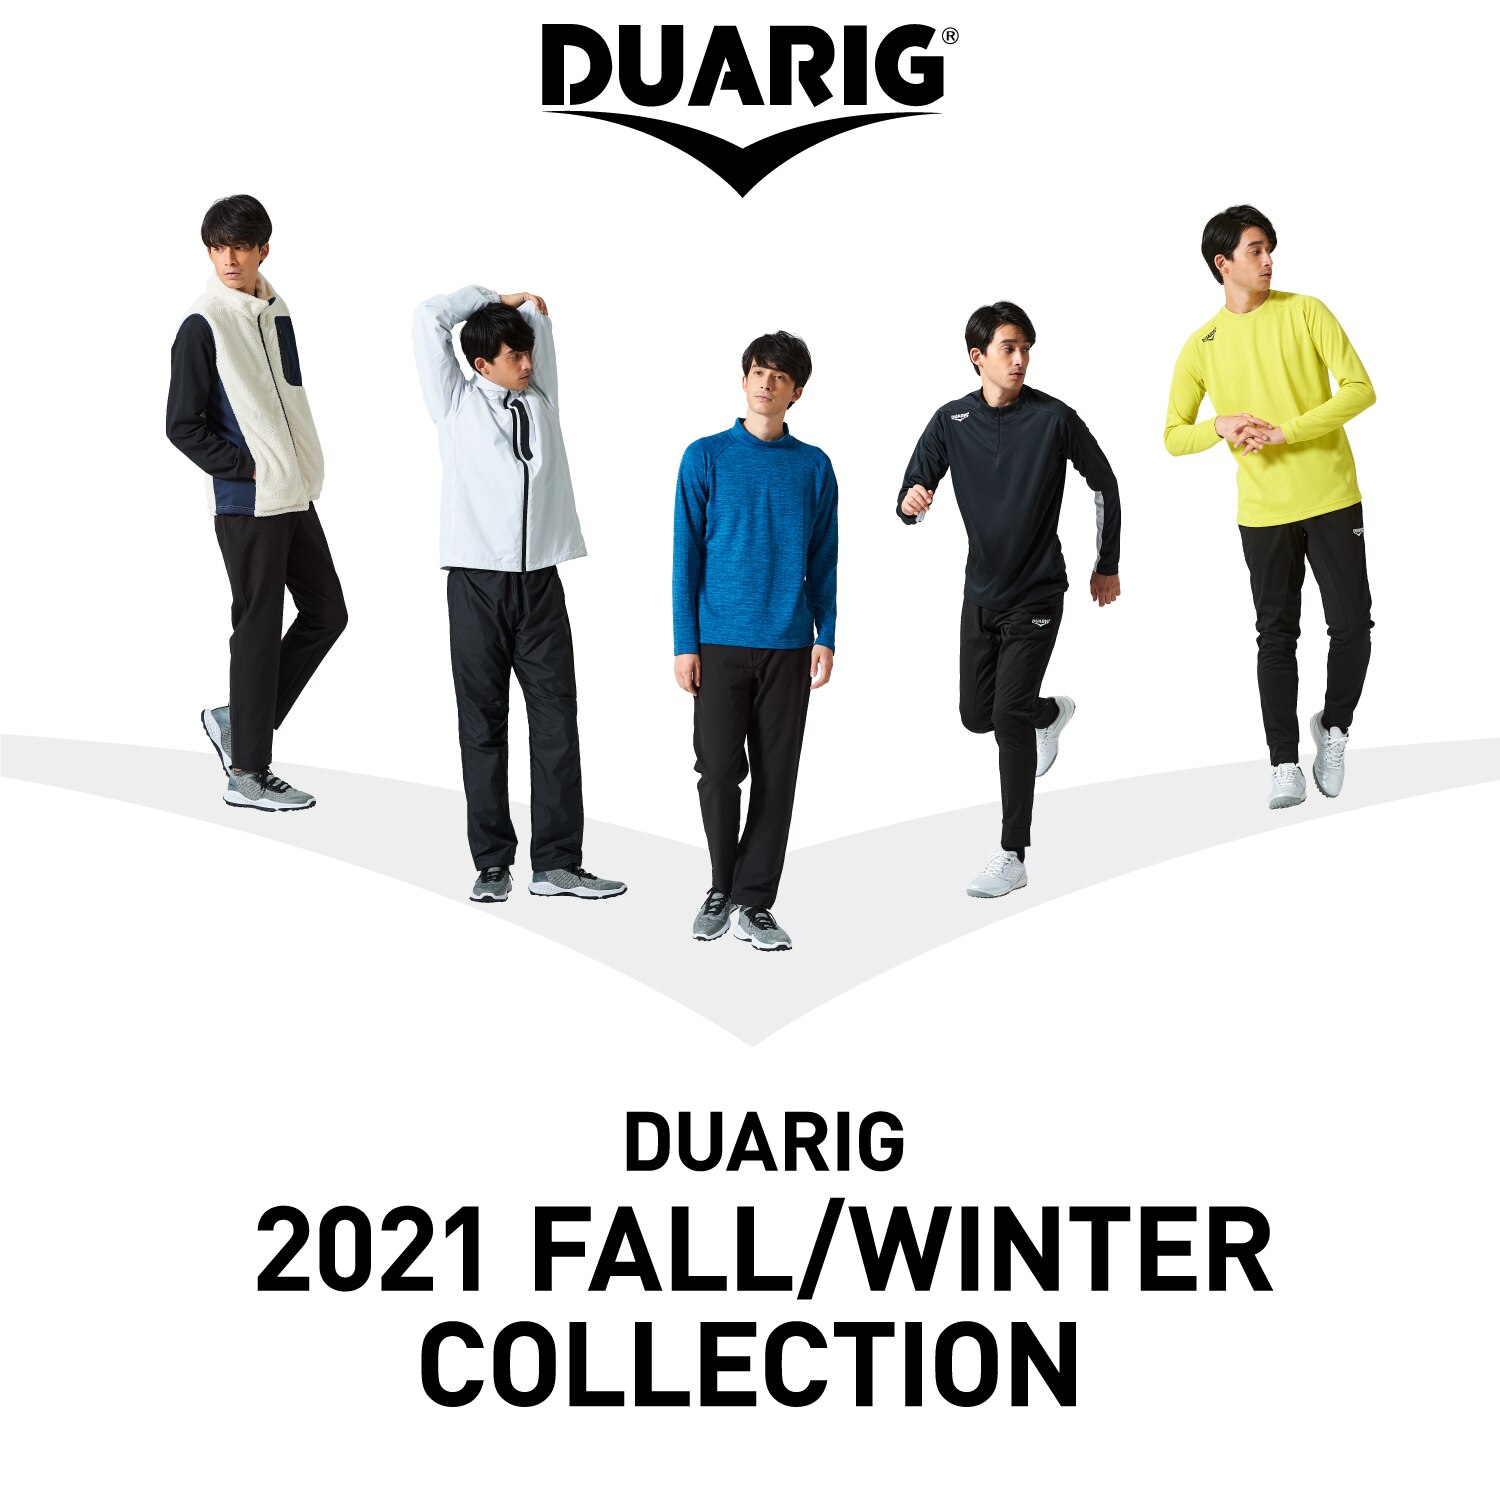 DUARIG 2021 FALL/WINTER COLLECTION